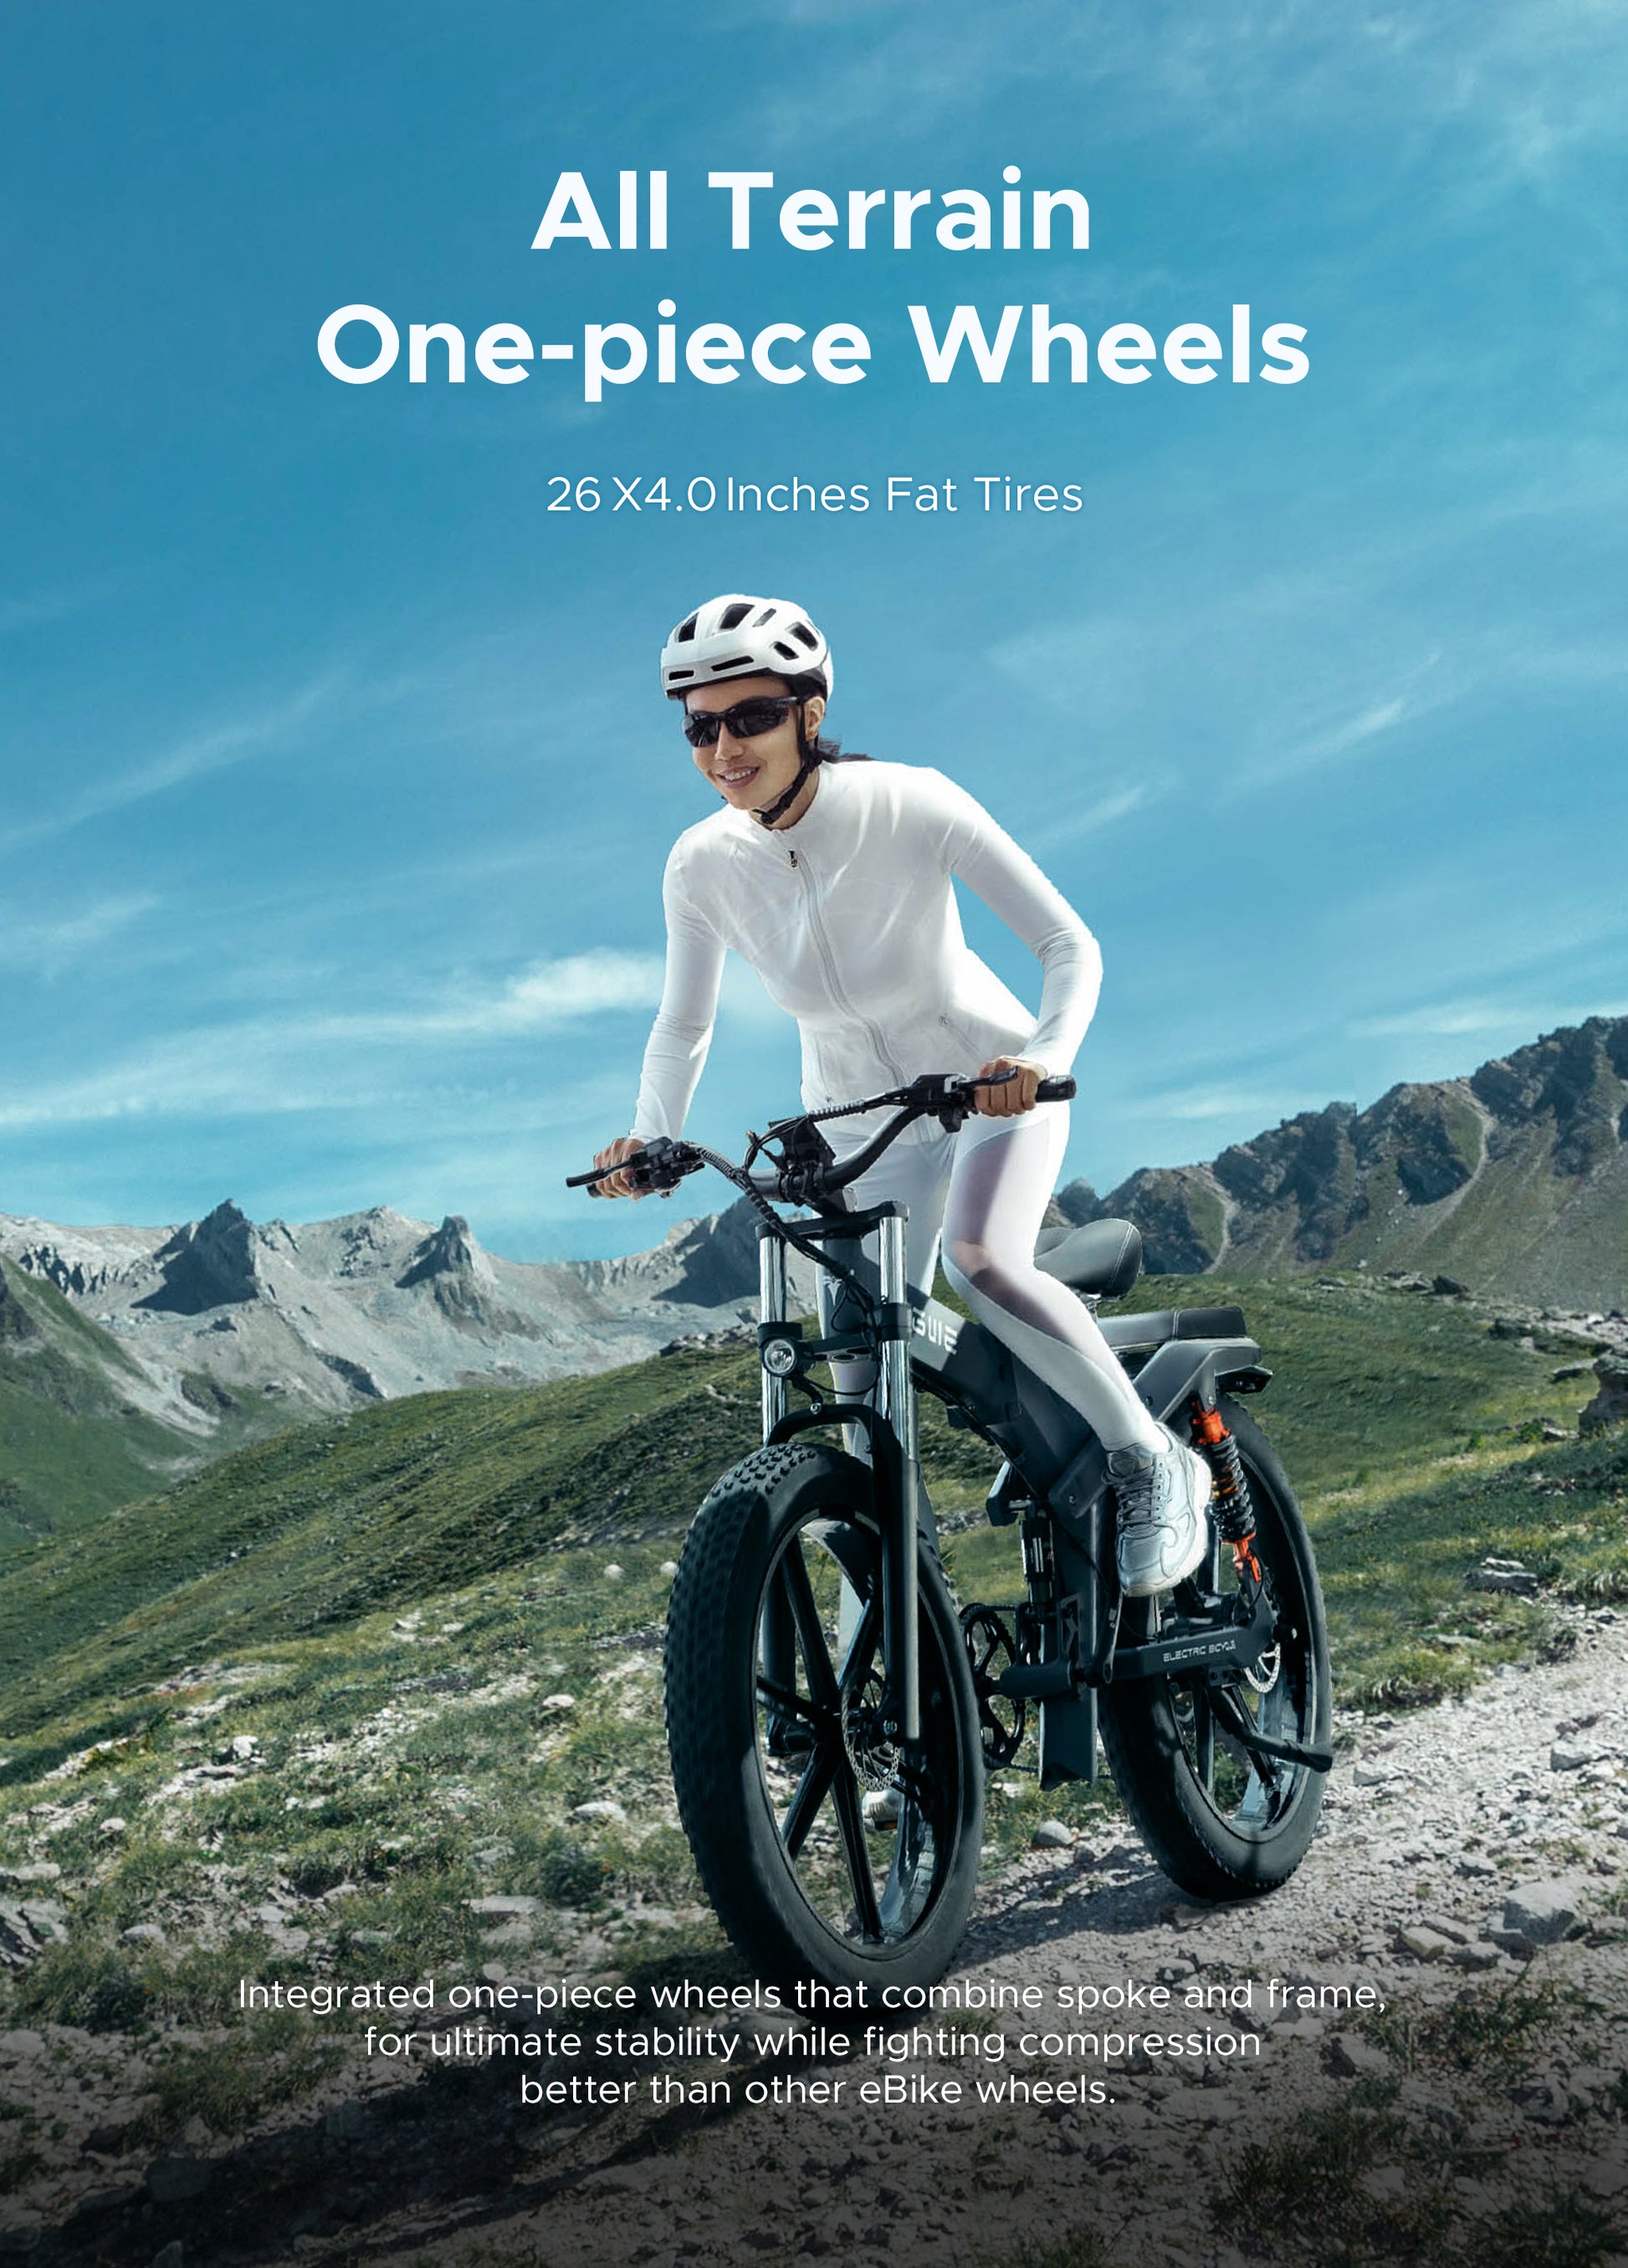 Female cyclist riding the Engwe X26 ebike with one-piece wheels on mountain terrain, exemplifying all-terrain capability.